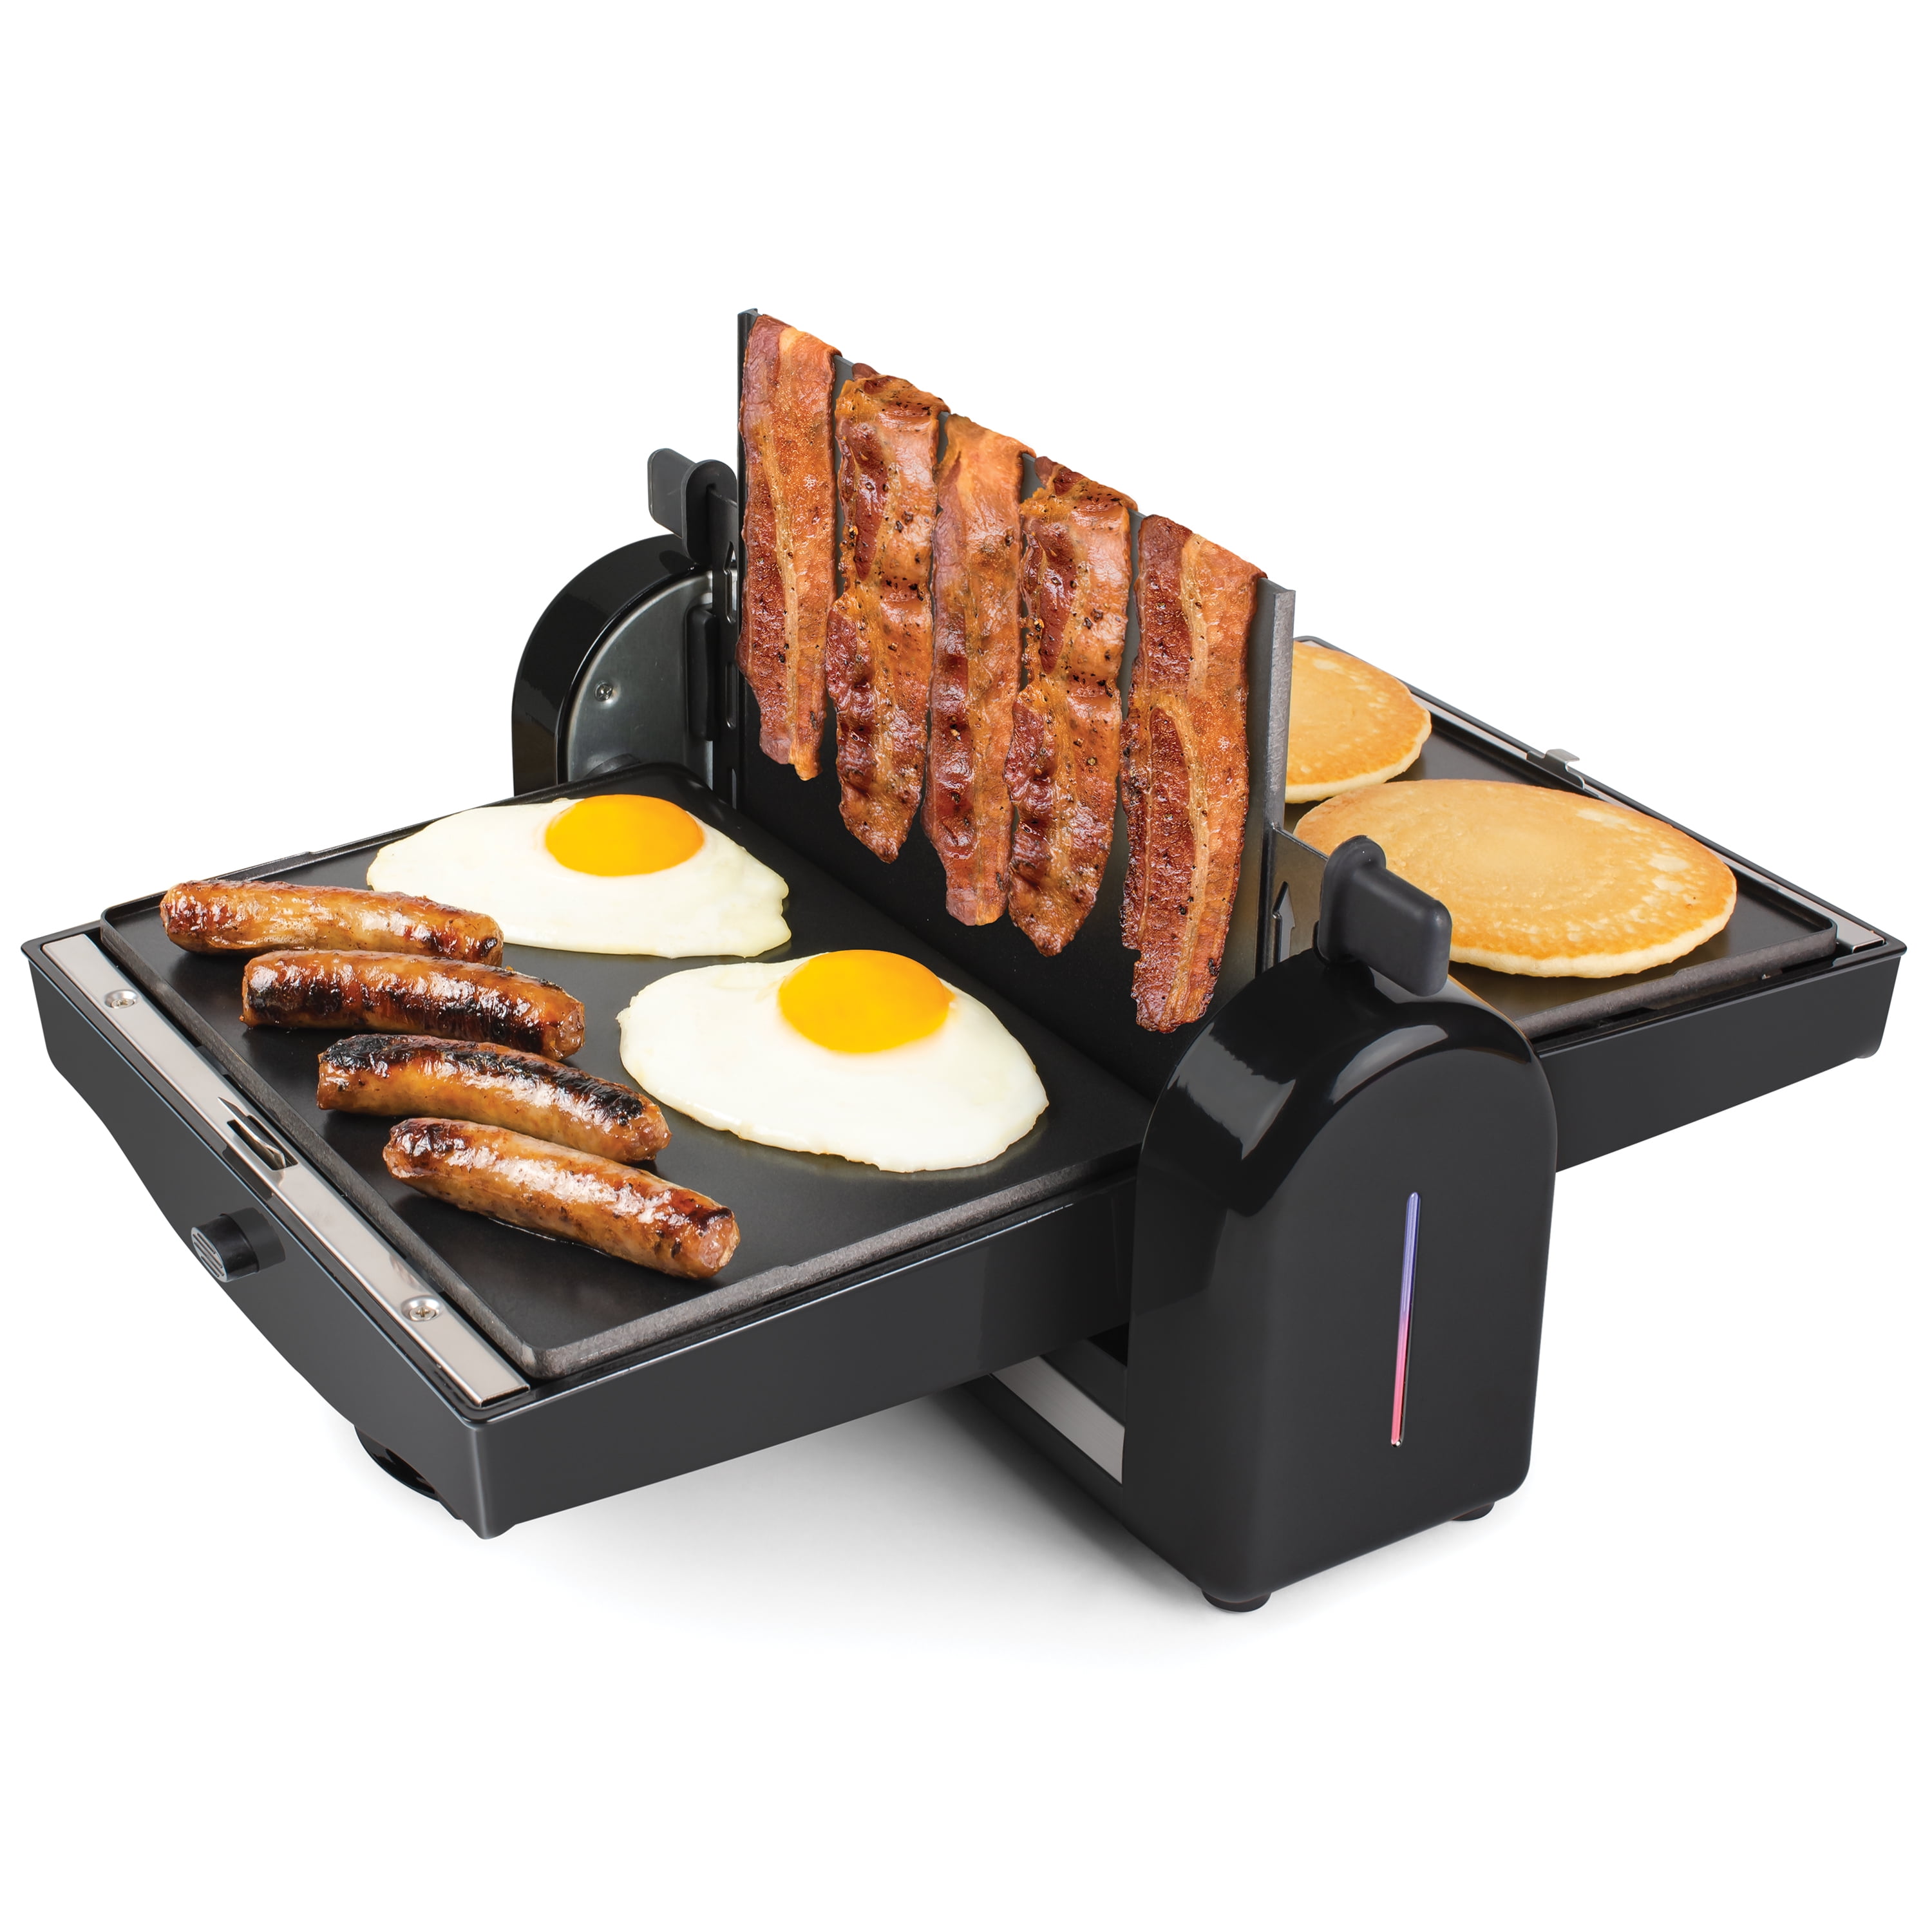 Best Grill Bacon Press [Testing] Do You Need One? – Bacon Camp!